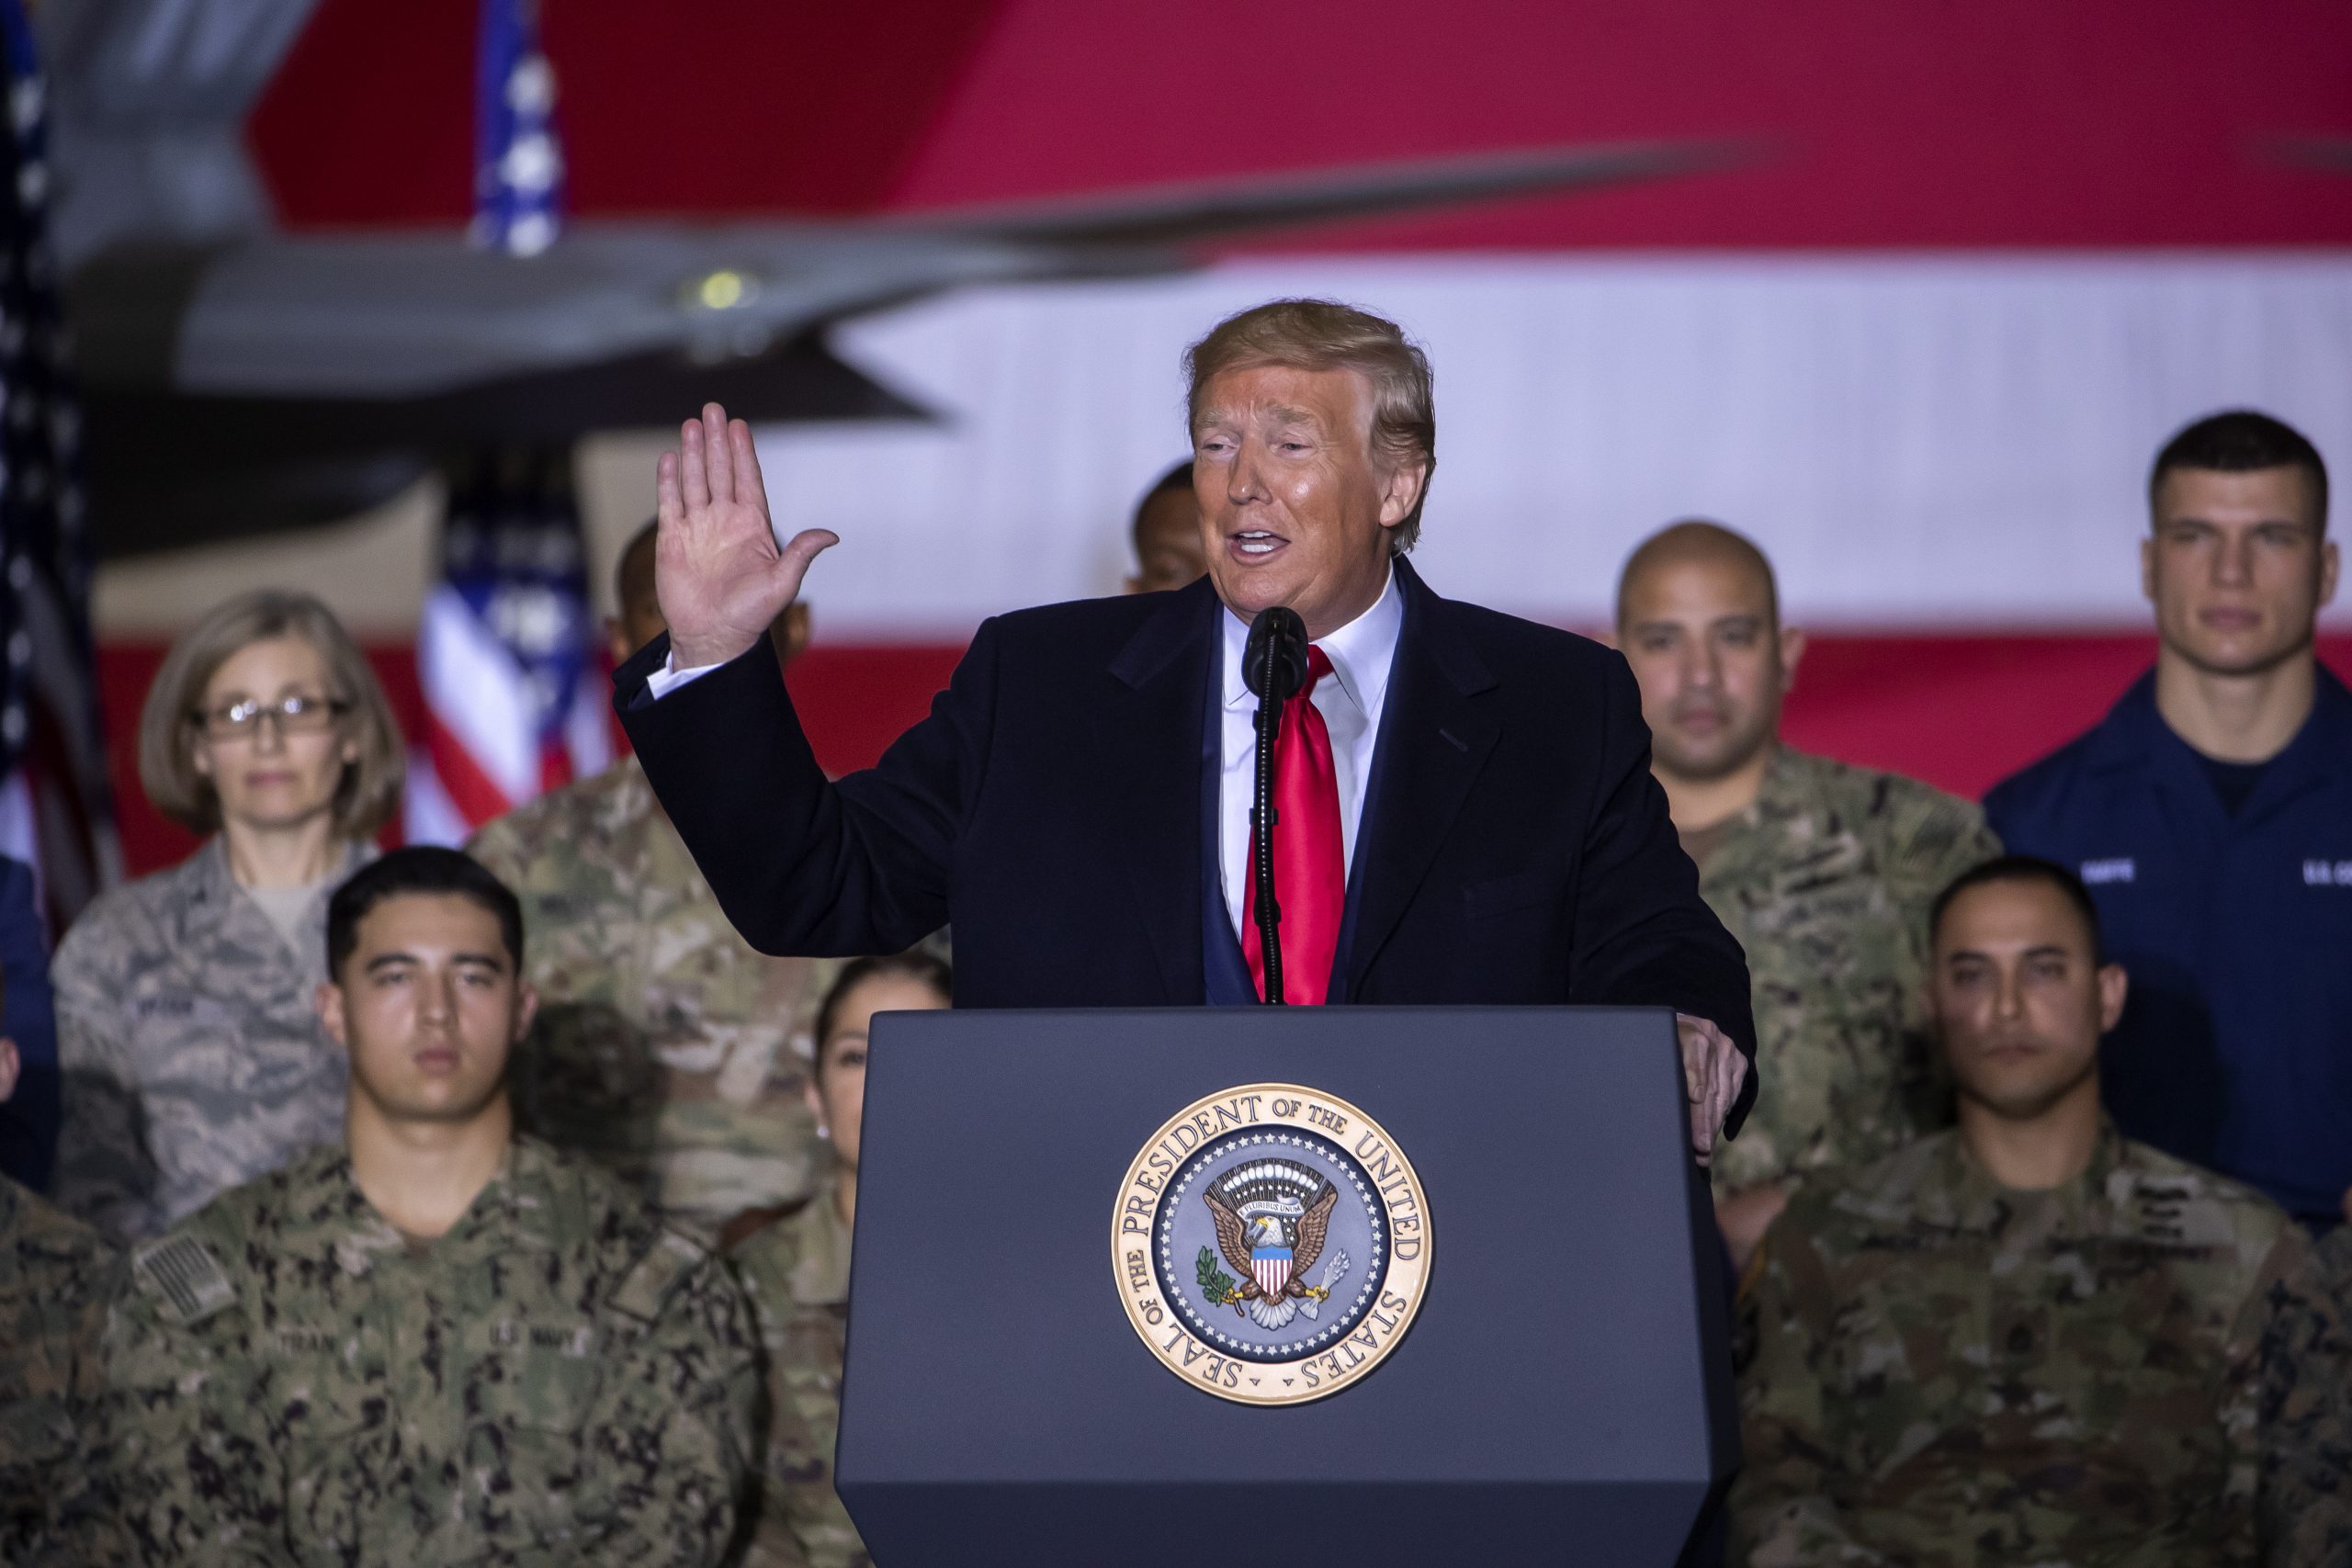 epa08084324 US President Donald J. Trump (C) speaks on stage during the signing ceremony for the National Defense Authorization Act for Fiscal Year 2020 inside Hangar Six at Joint Base Andrews in Suitland, Maryland, USA, 20 December 2019. The 738 billion US dollar military funding bill includes the creation of the Space Force.  EPA/ERIK S. LESSER